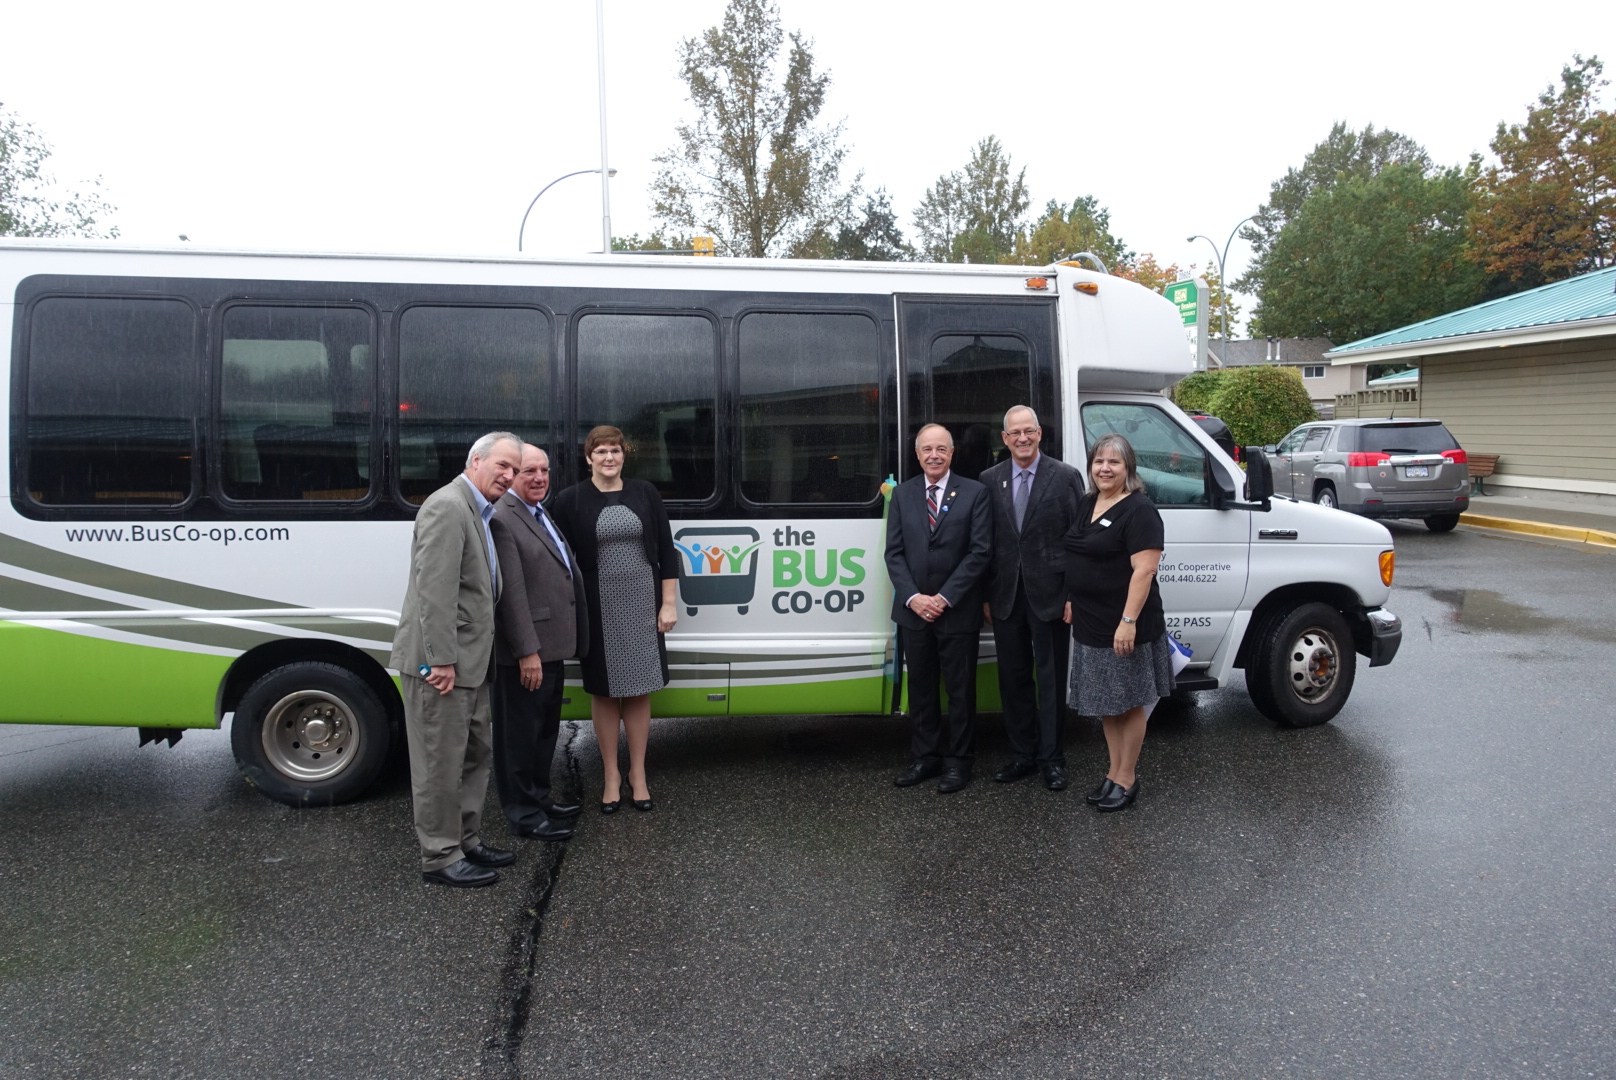 The Bus Co-op launches in Langley